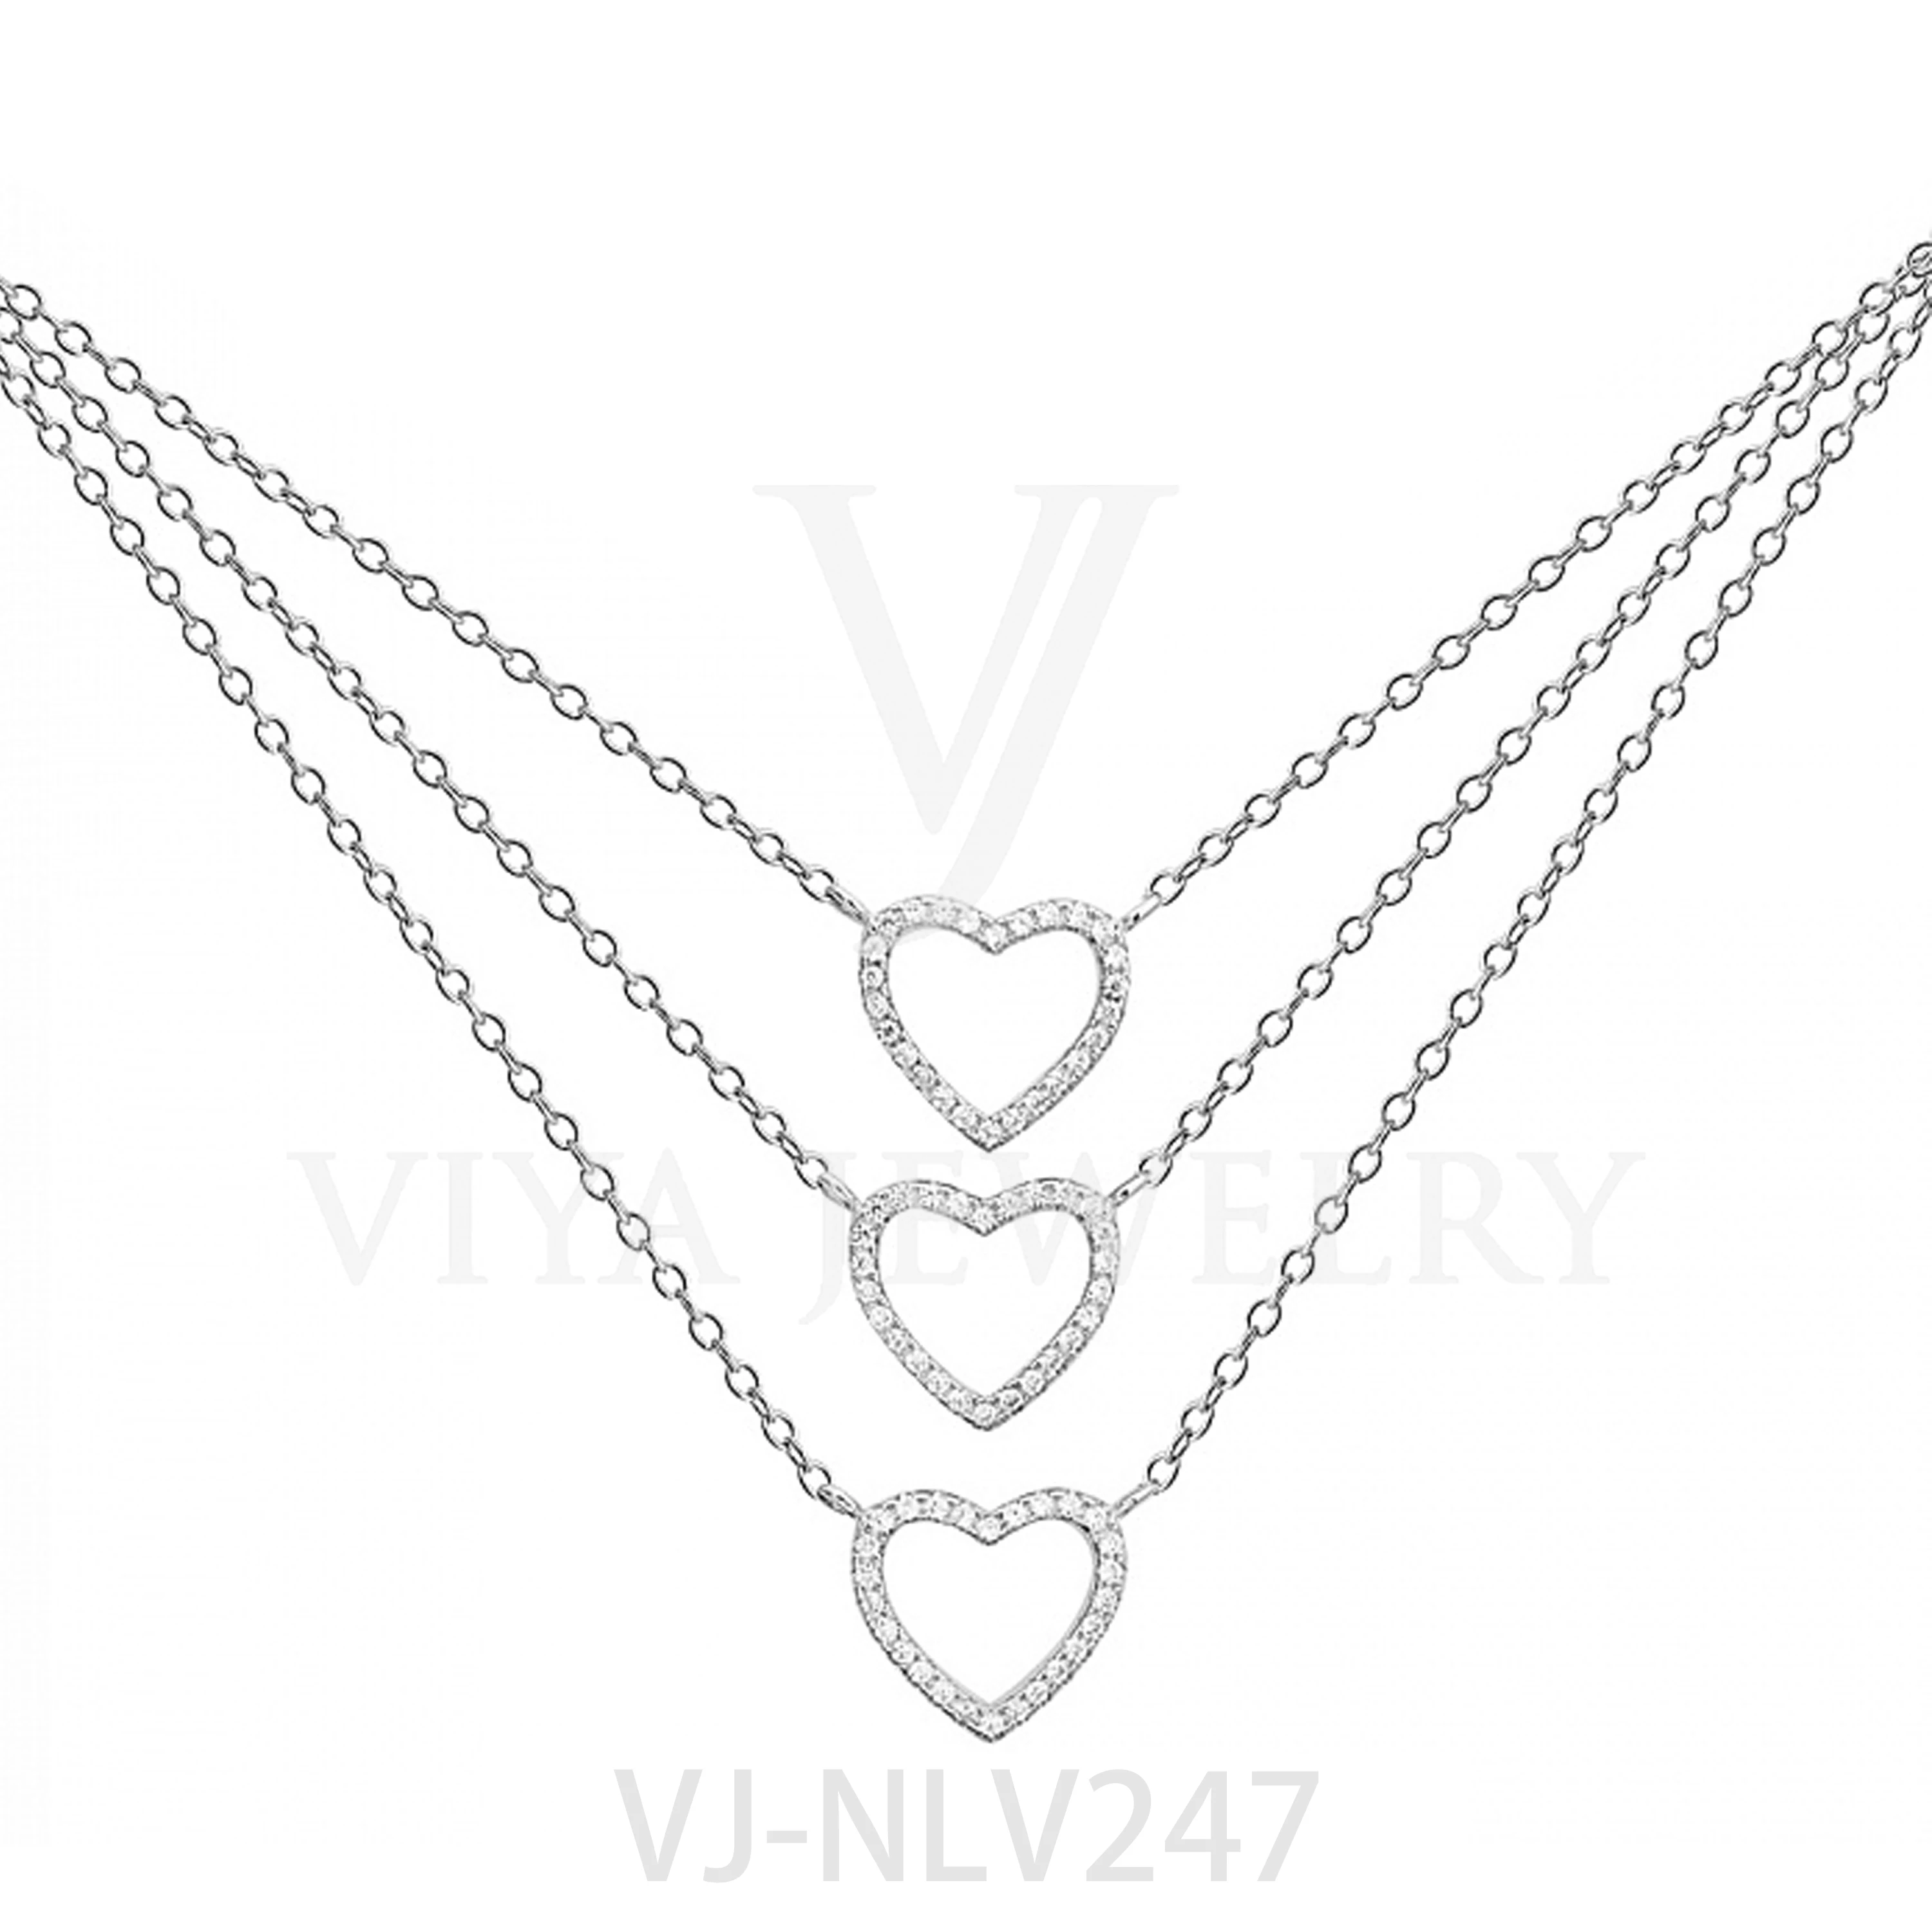 

The REFLECTION OF Necklace Made of 925 Sterling Silver Romantic Pendant Consists Of Three Hearts